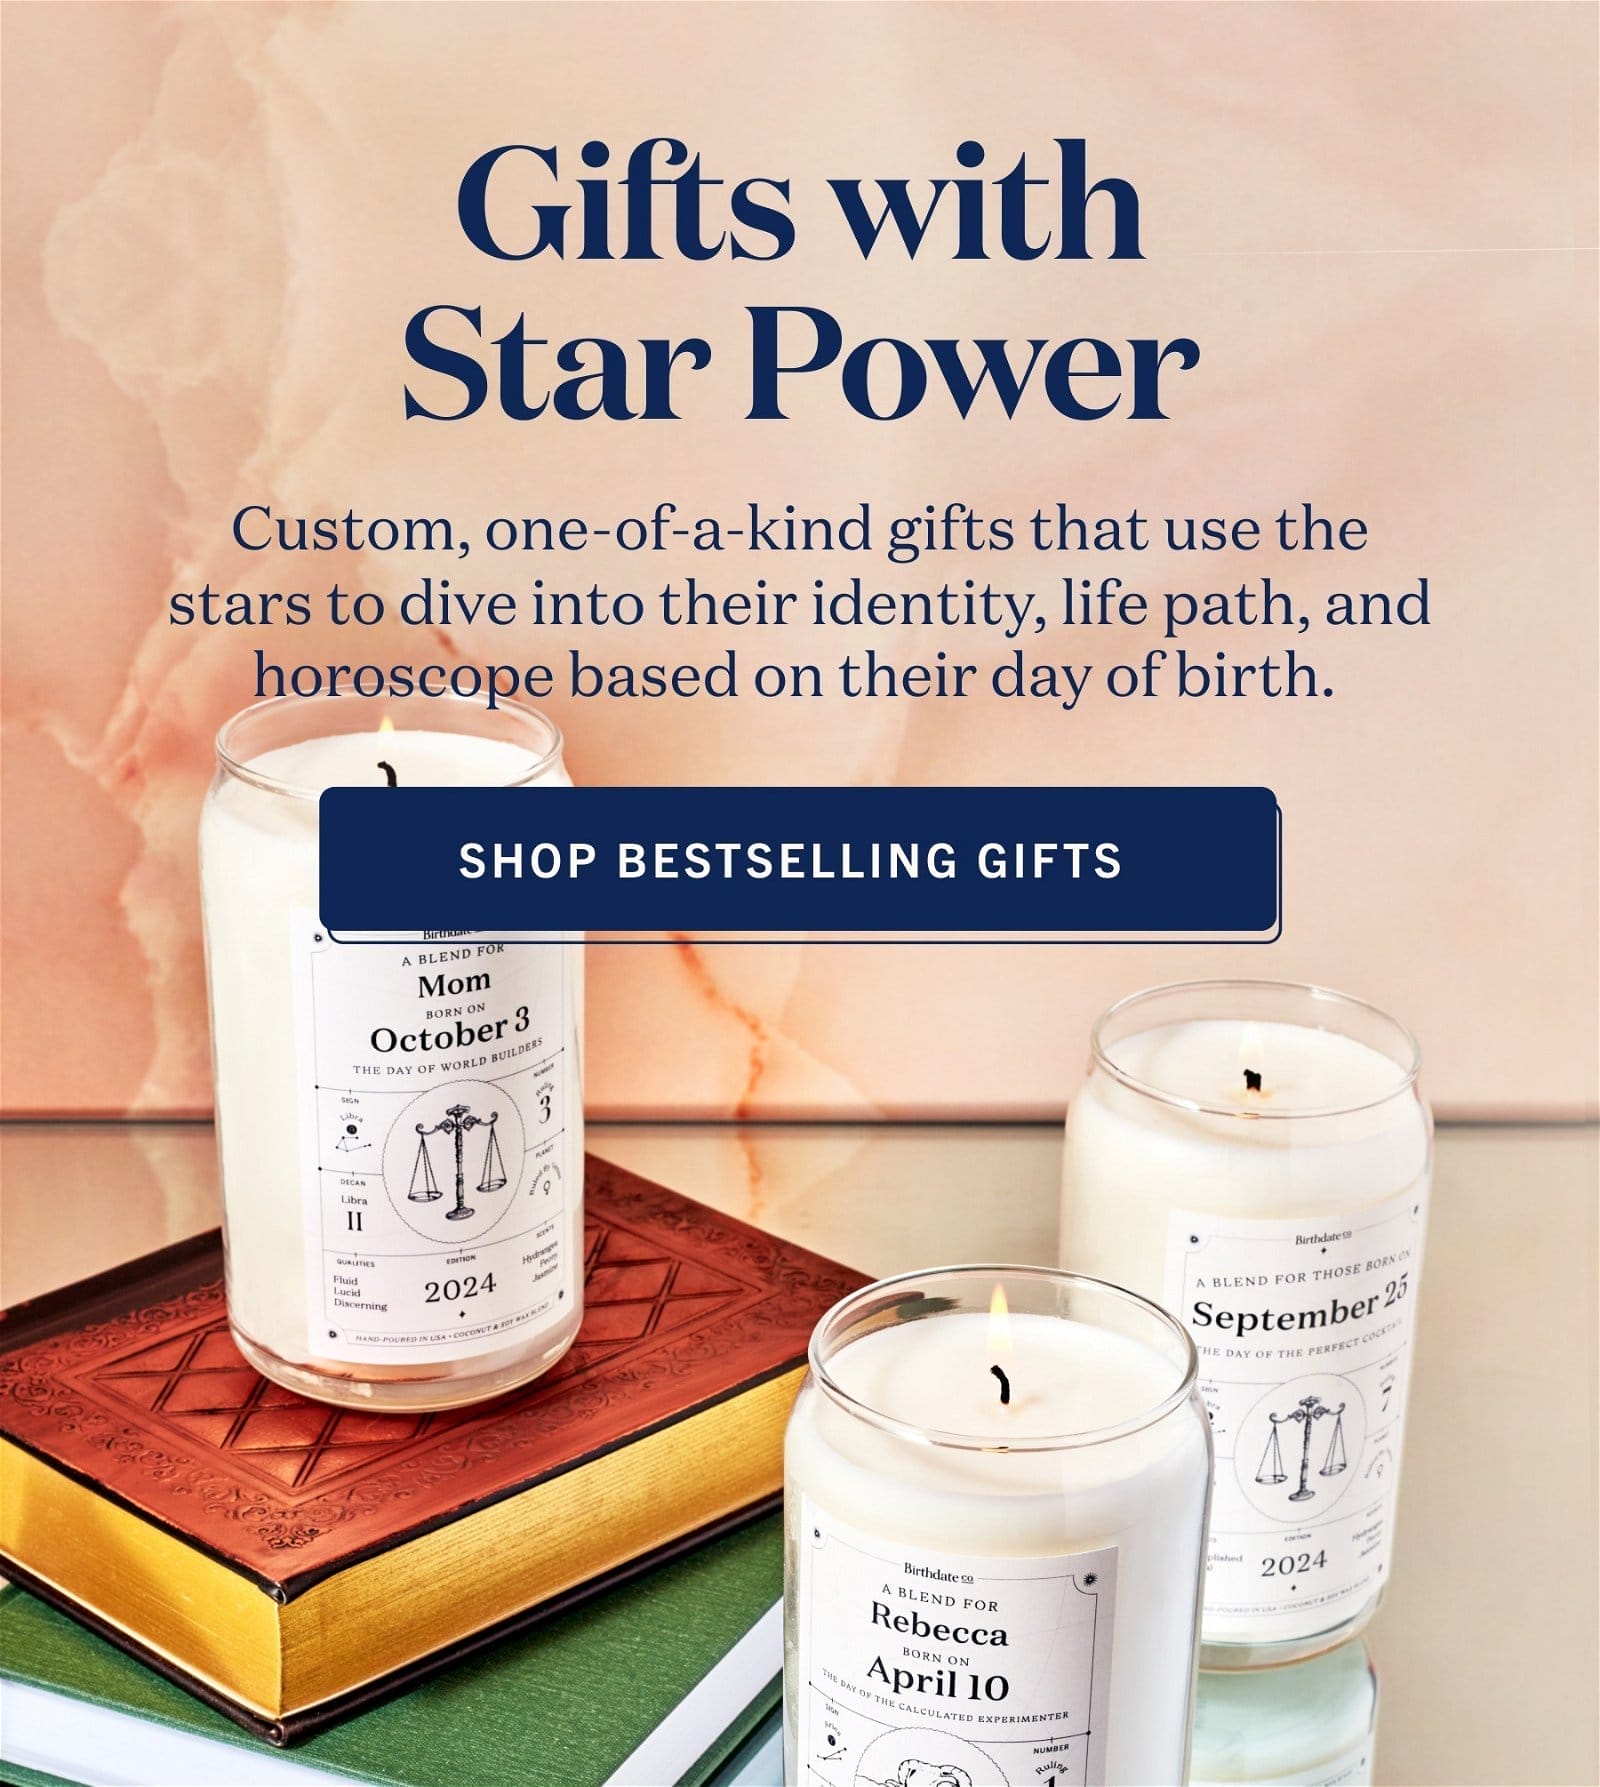 sHOP bestselling gifts